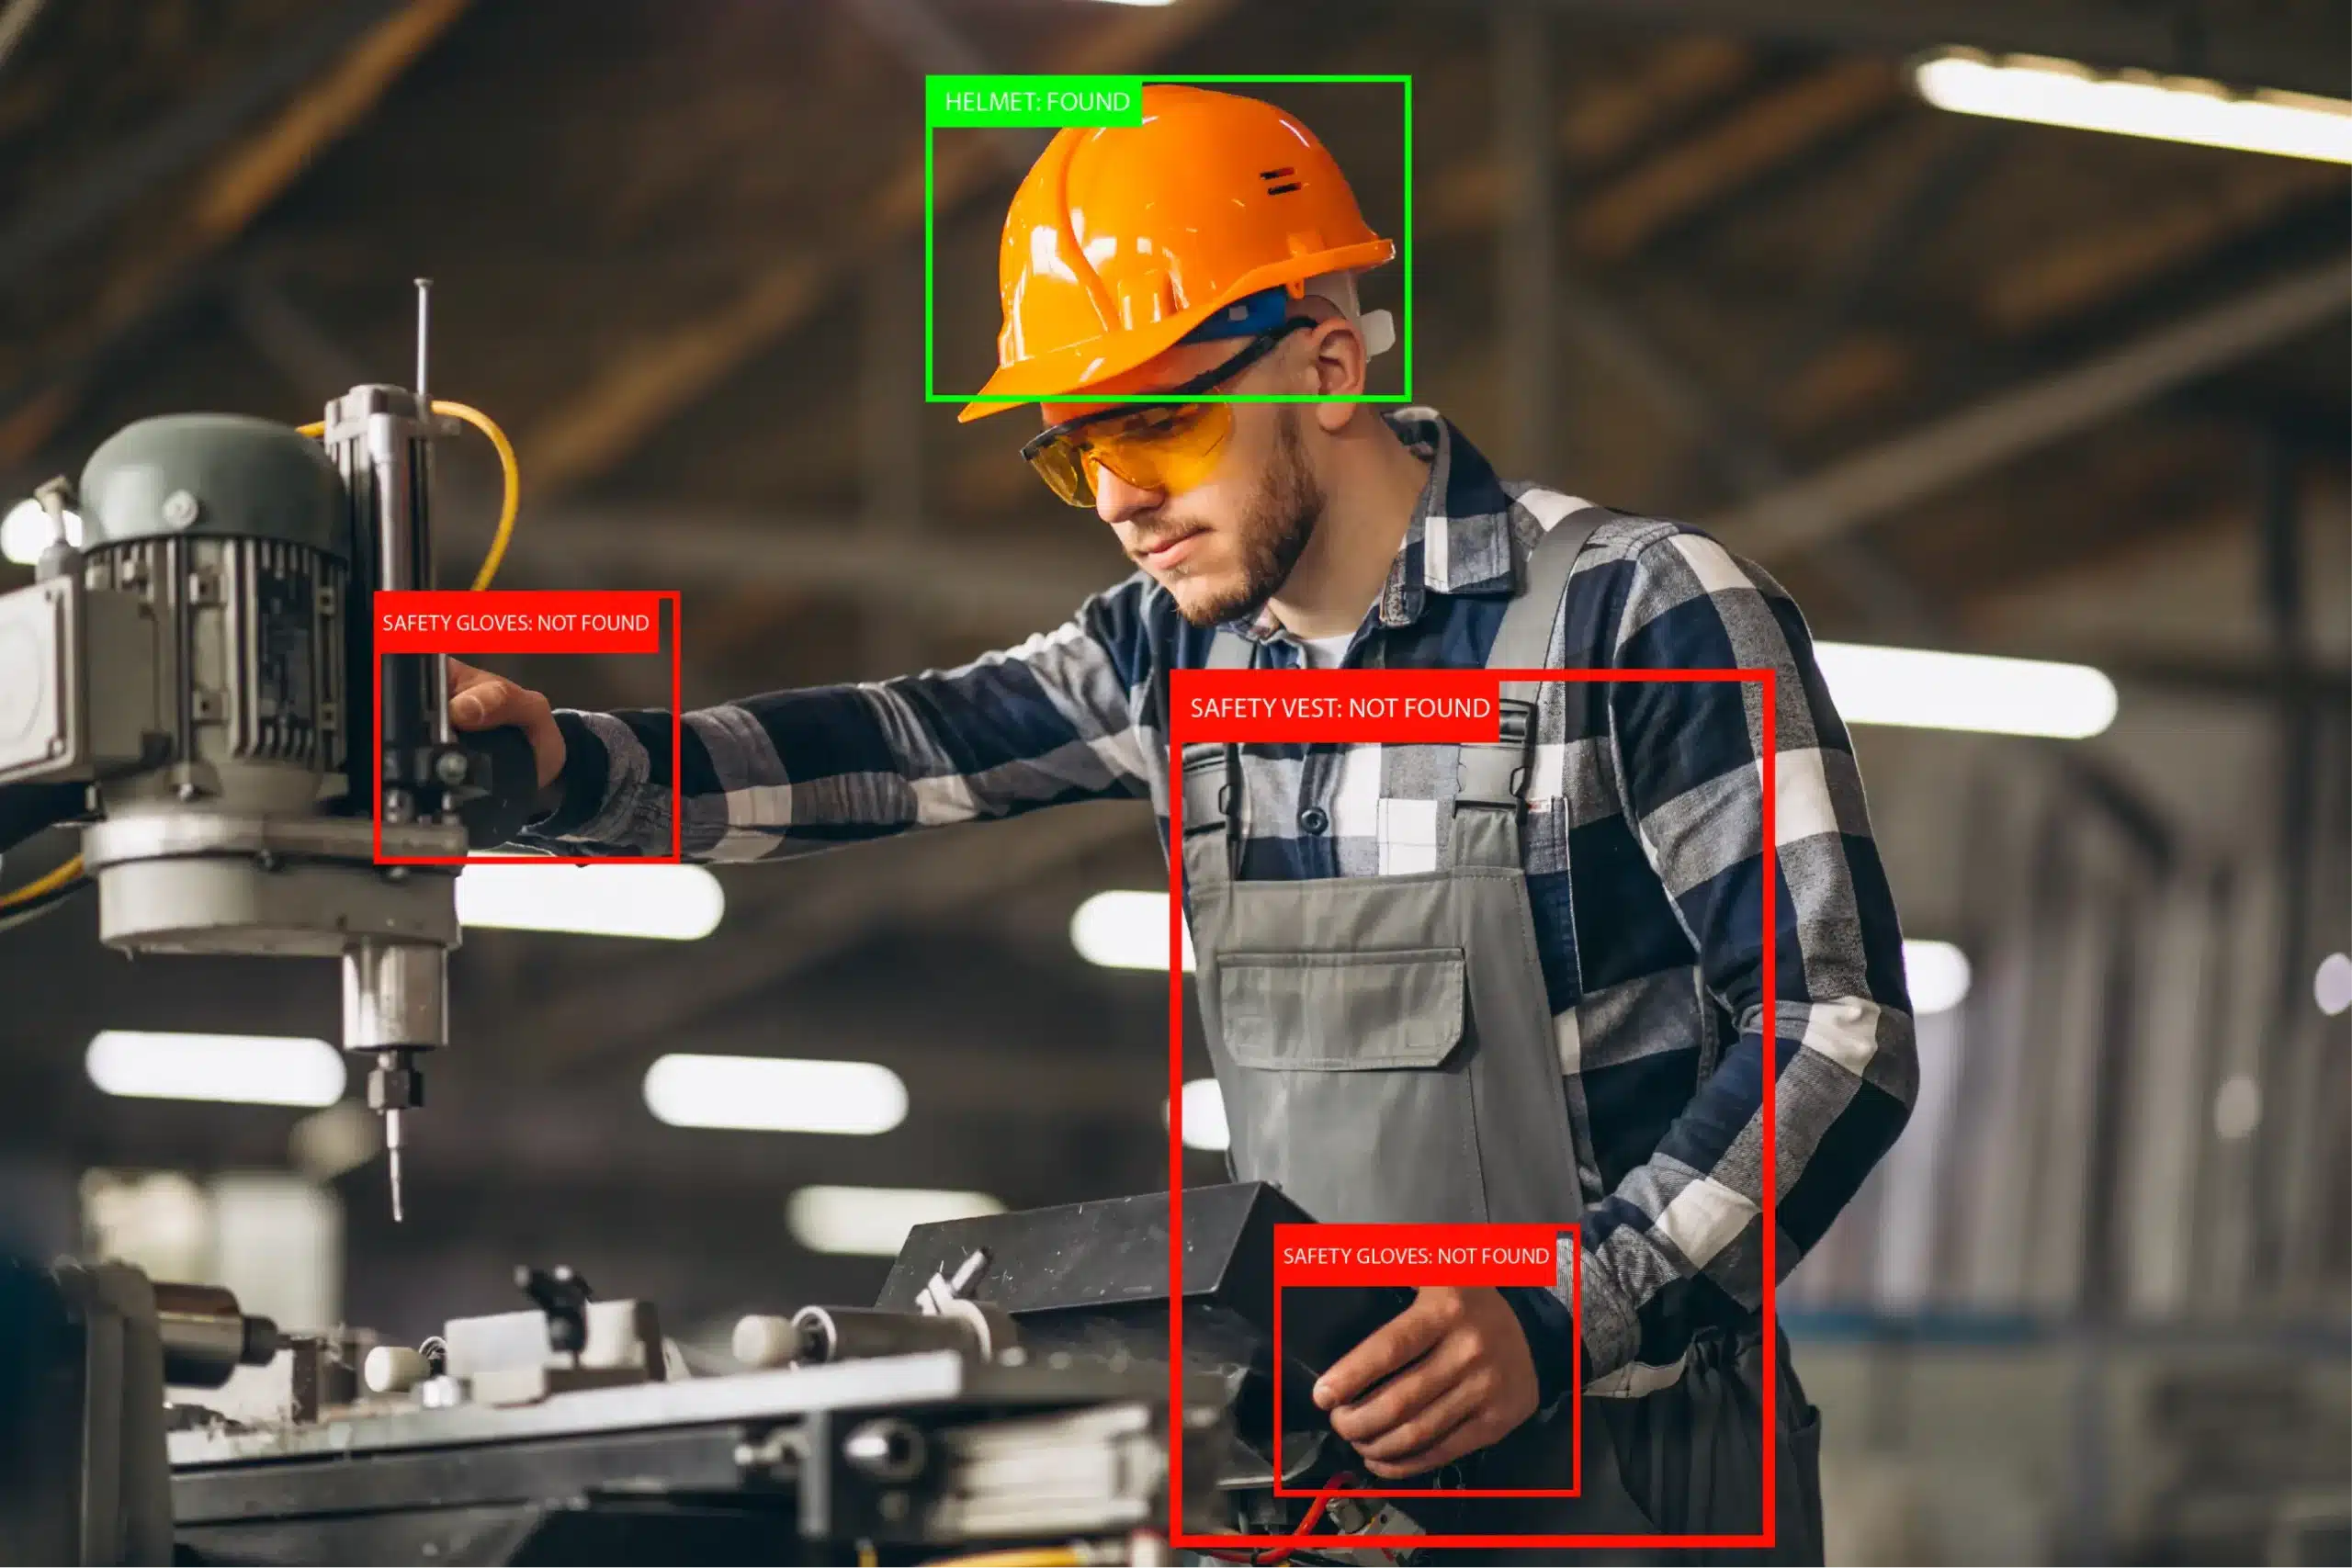 VisionAI Solutions for Workplace Safety